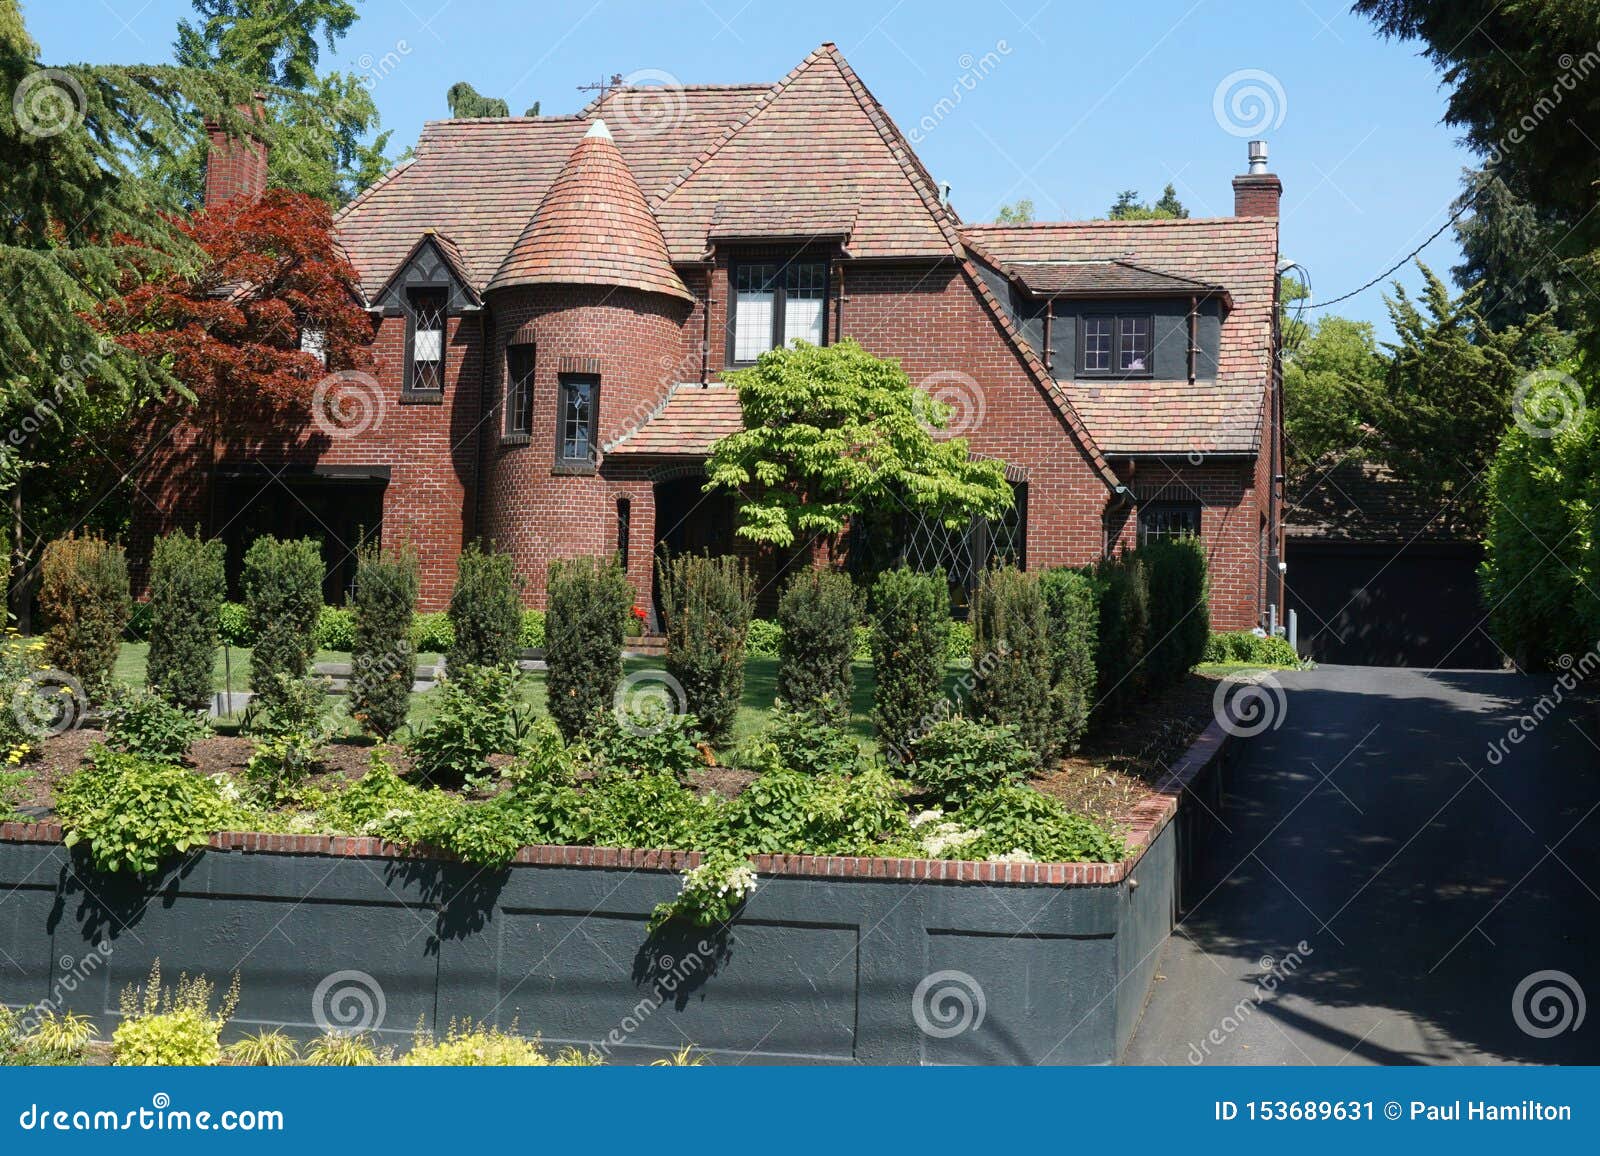 Brick House With Turret In Affluent Neighborhood Stock 